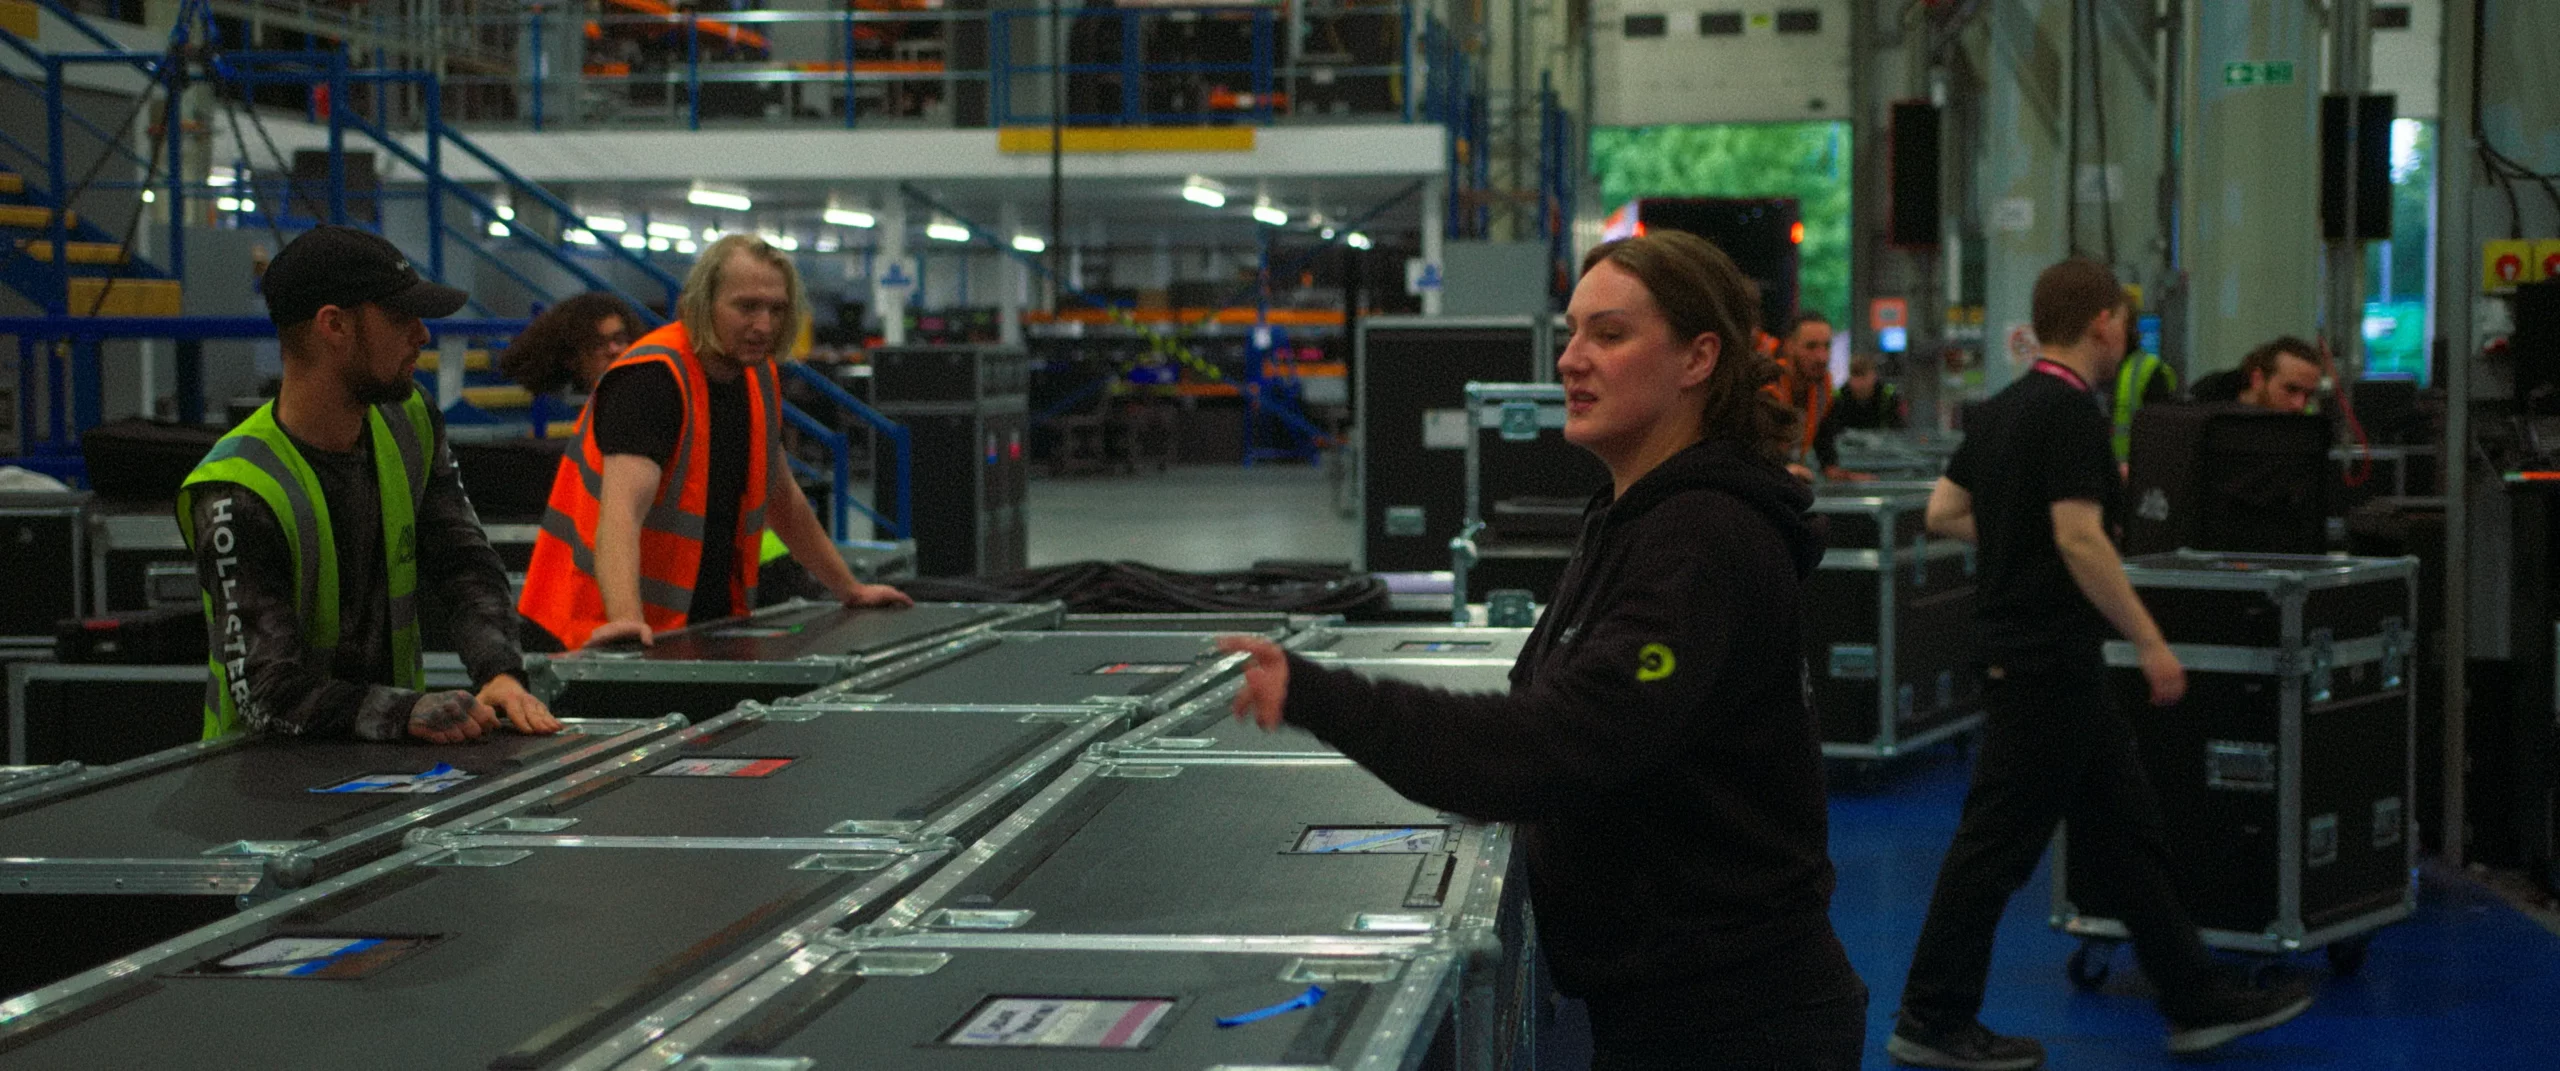 Natalie Gebbie directs warehouse workers during the filming of the short film For You filmed by KINØ